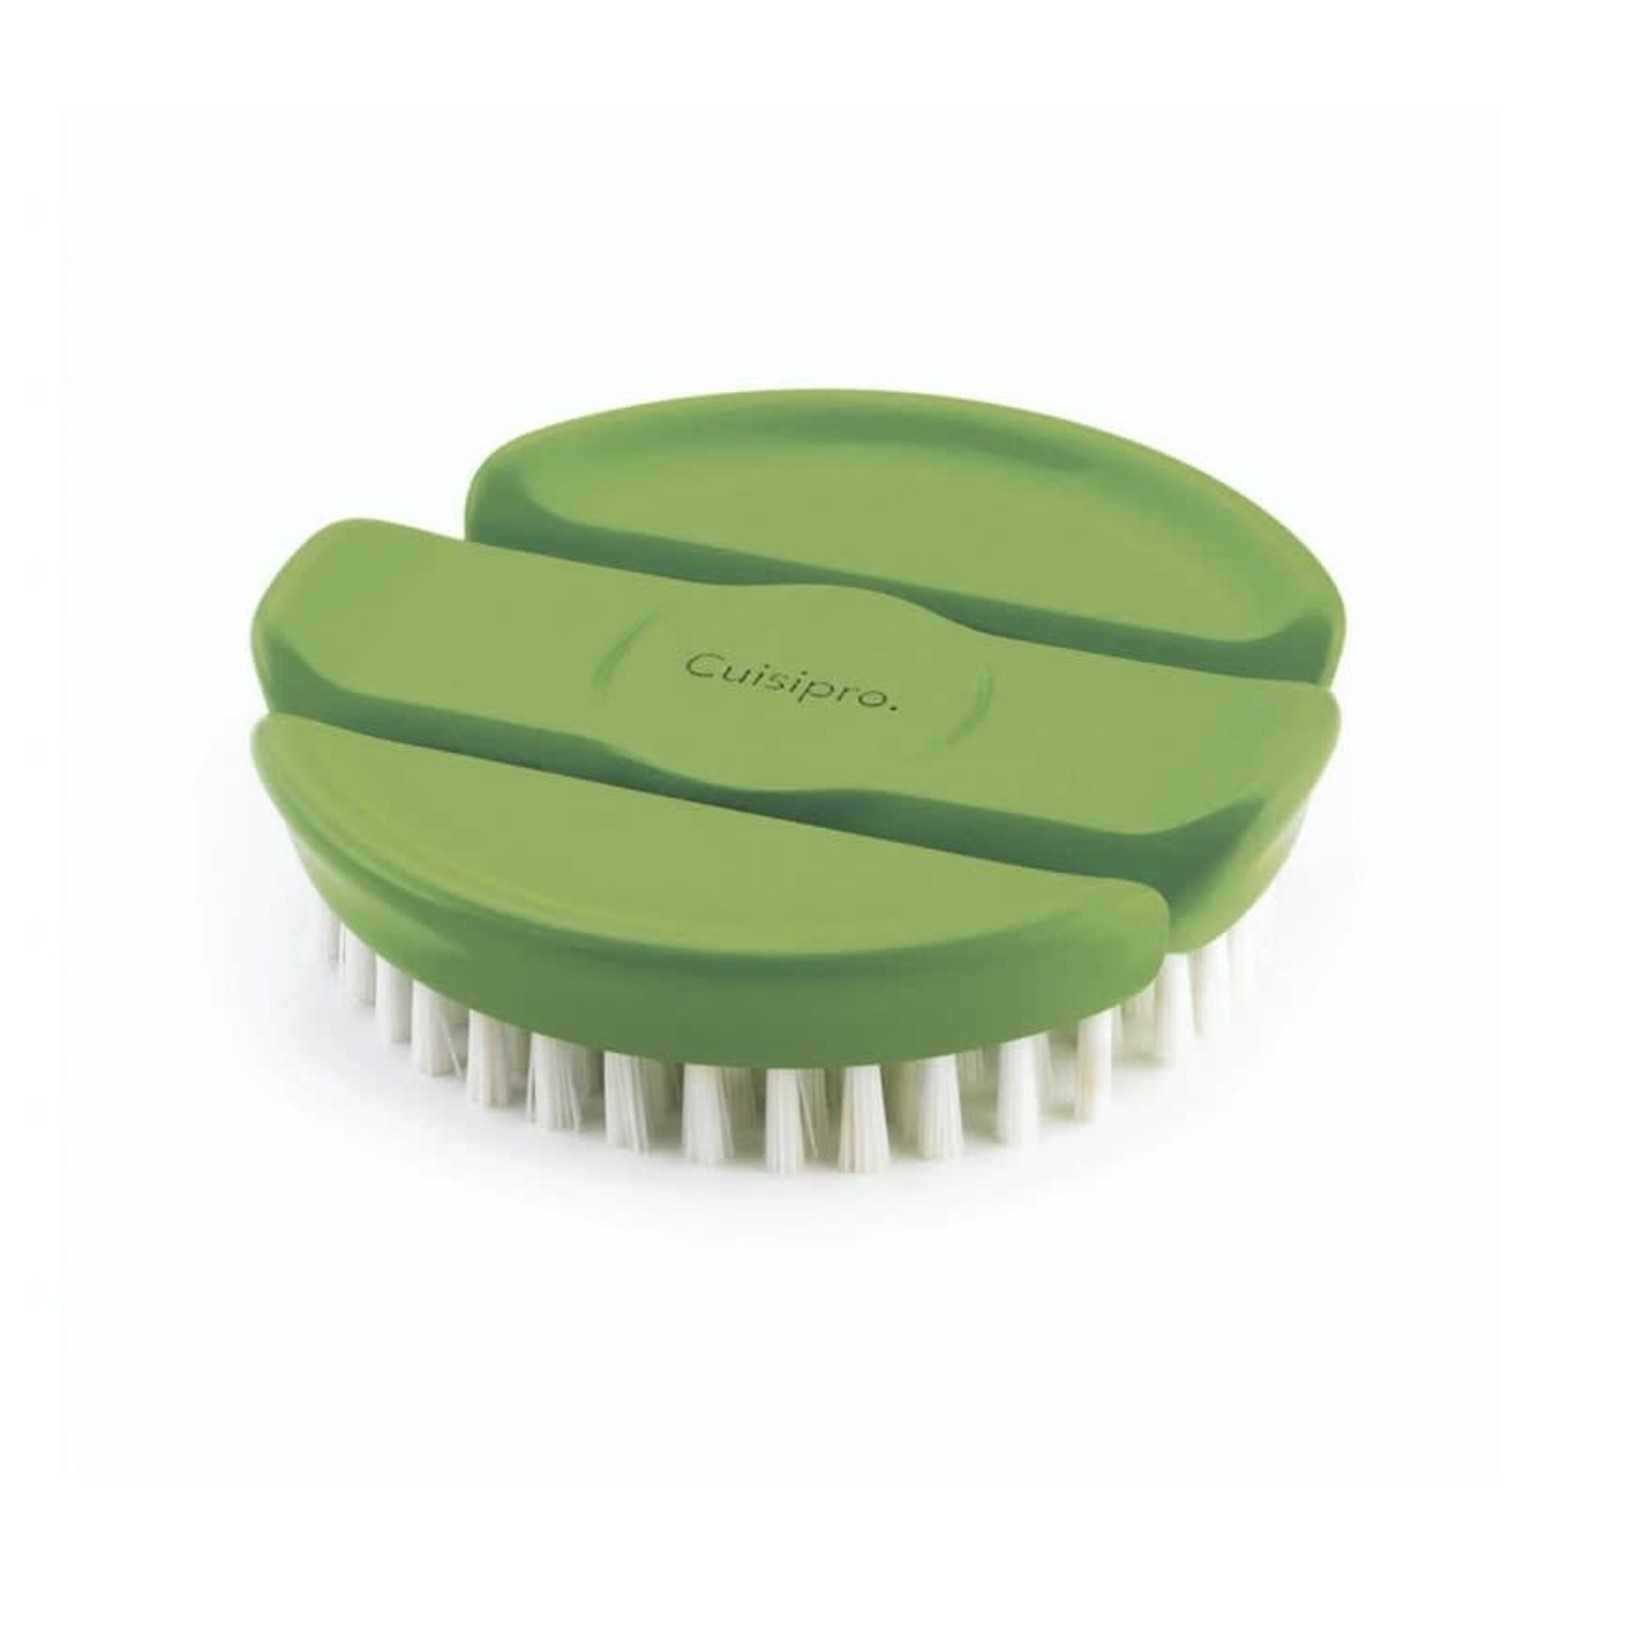 CUISIPRO CUISIPRO Vegetable Brush  green